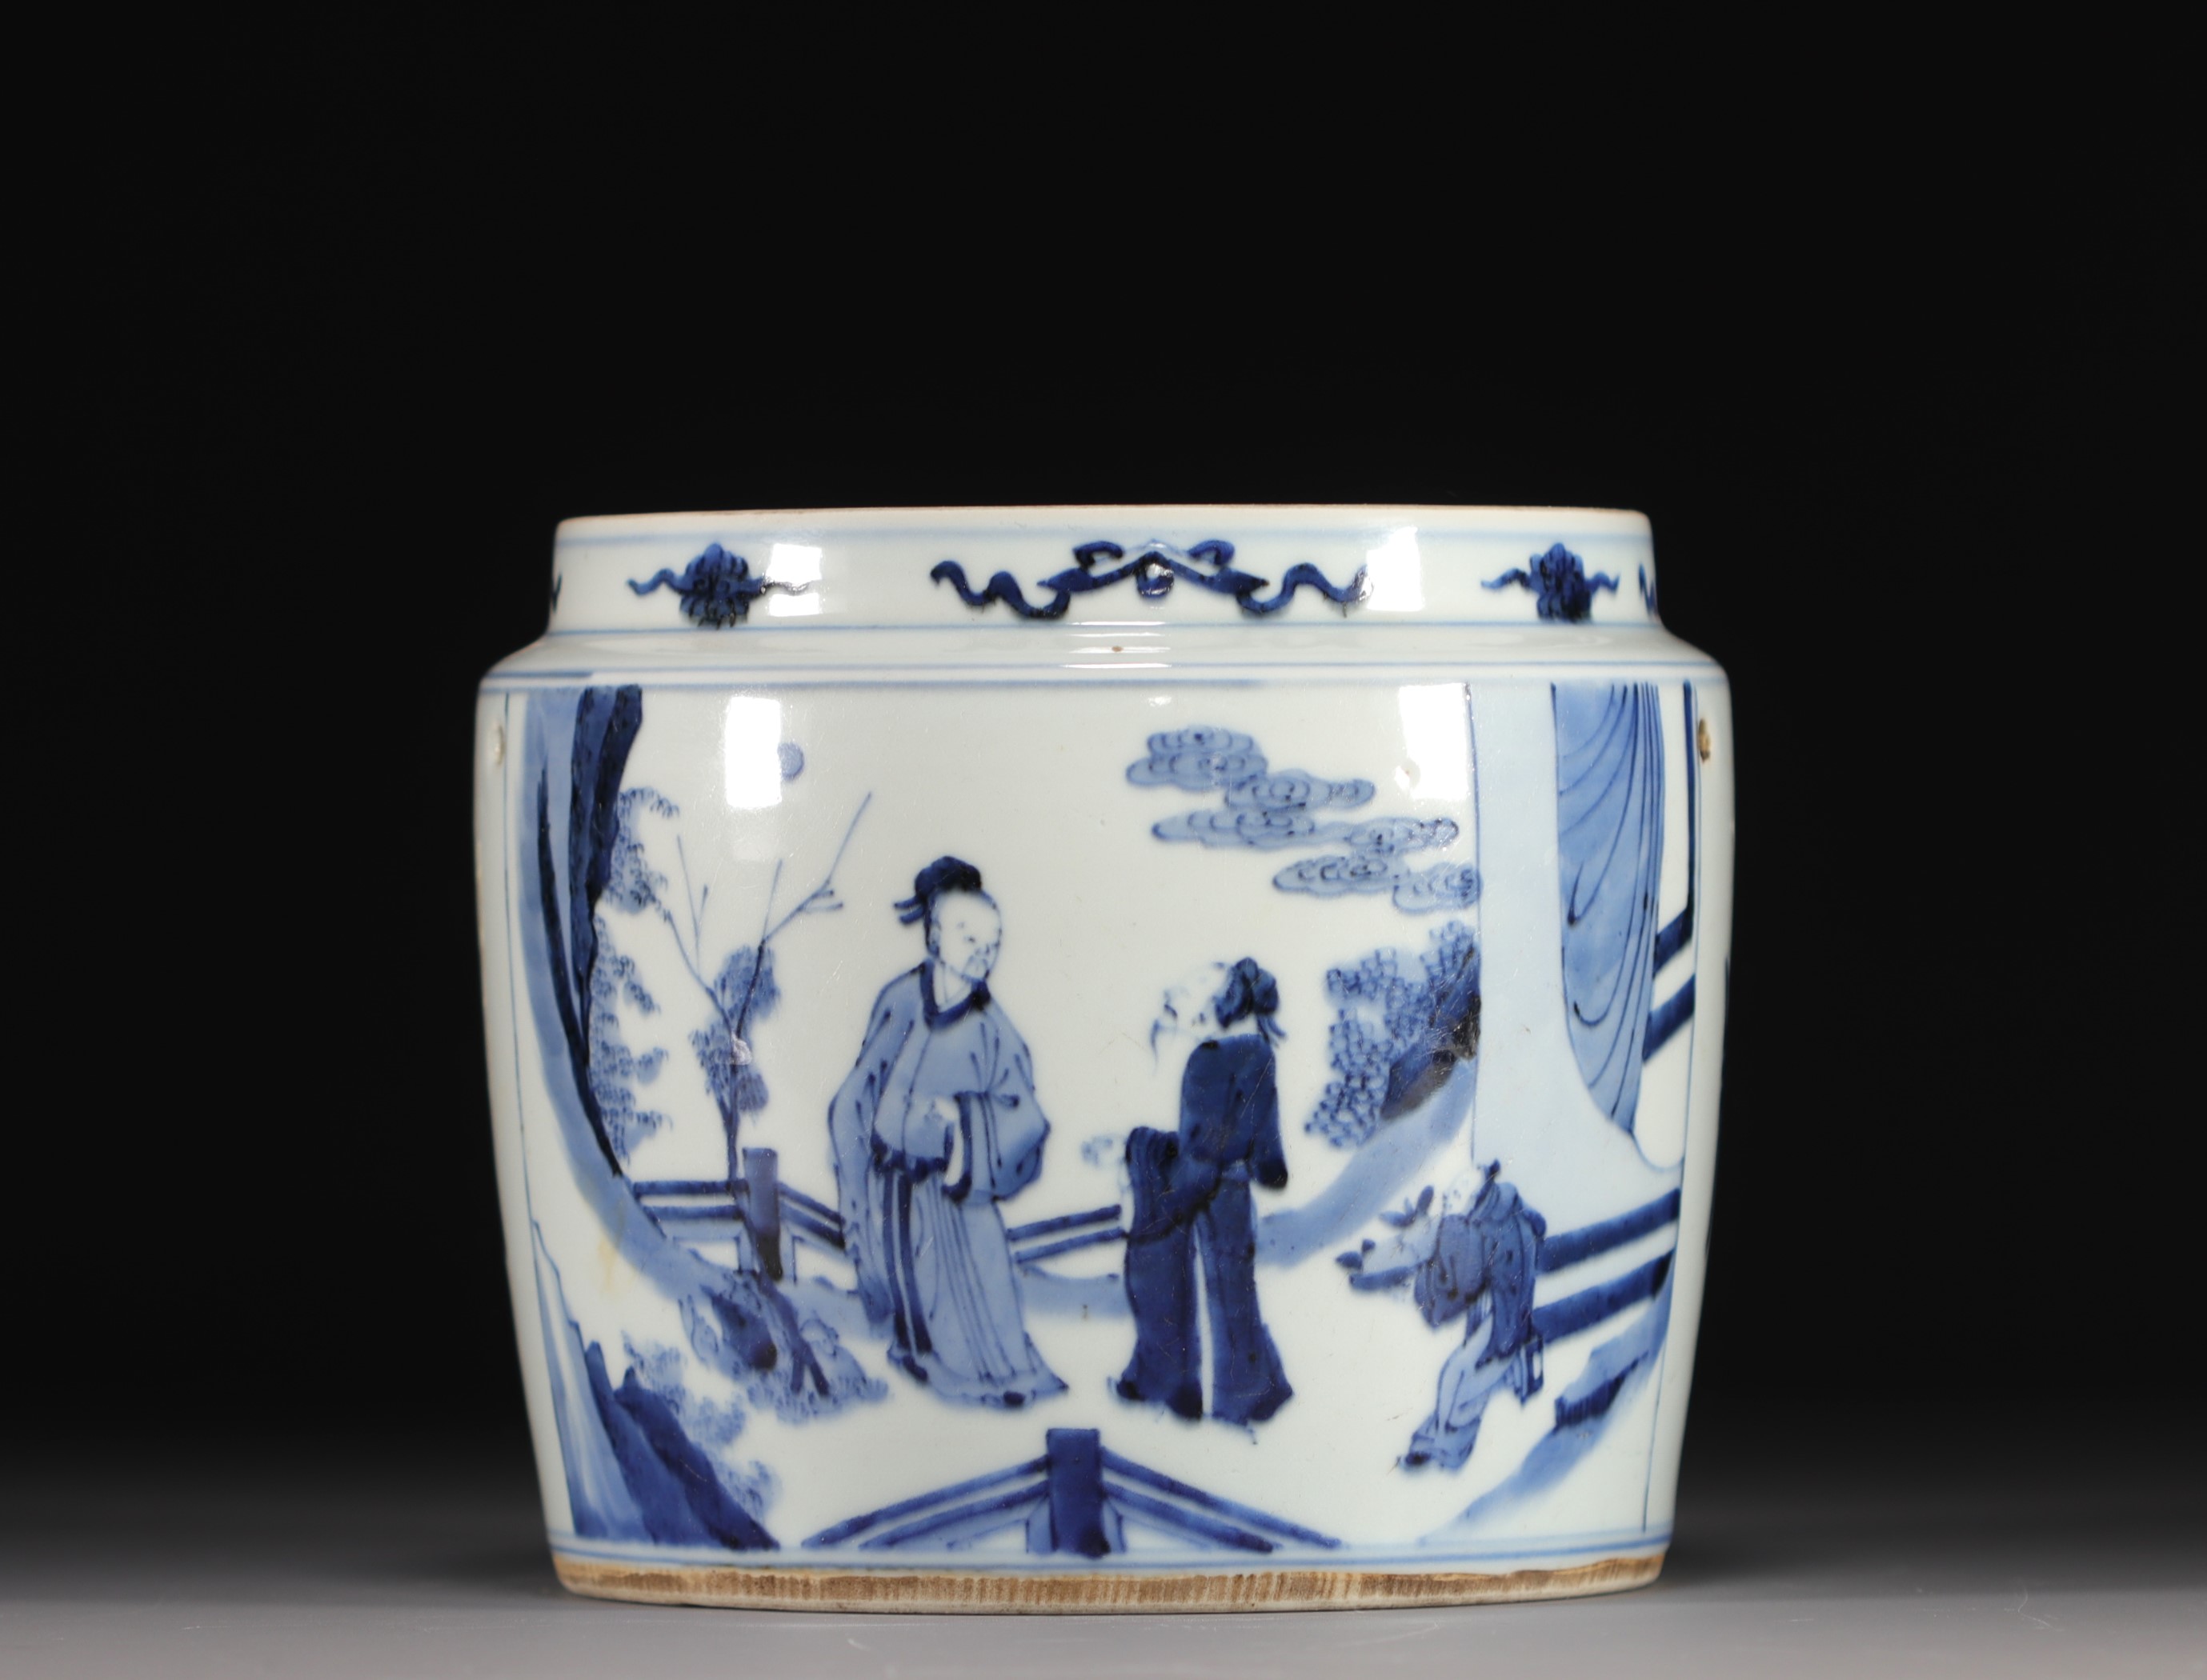 China - Perfume burner in blue porcelain with figures, 18th century. - Image 7 of 7